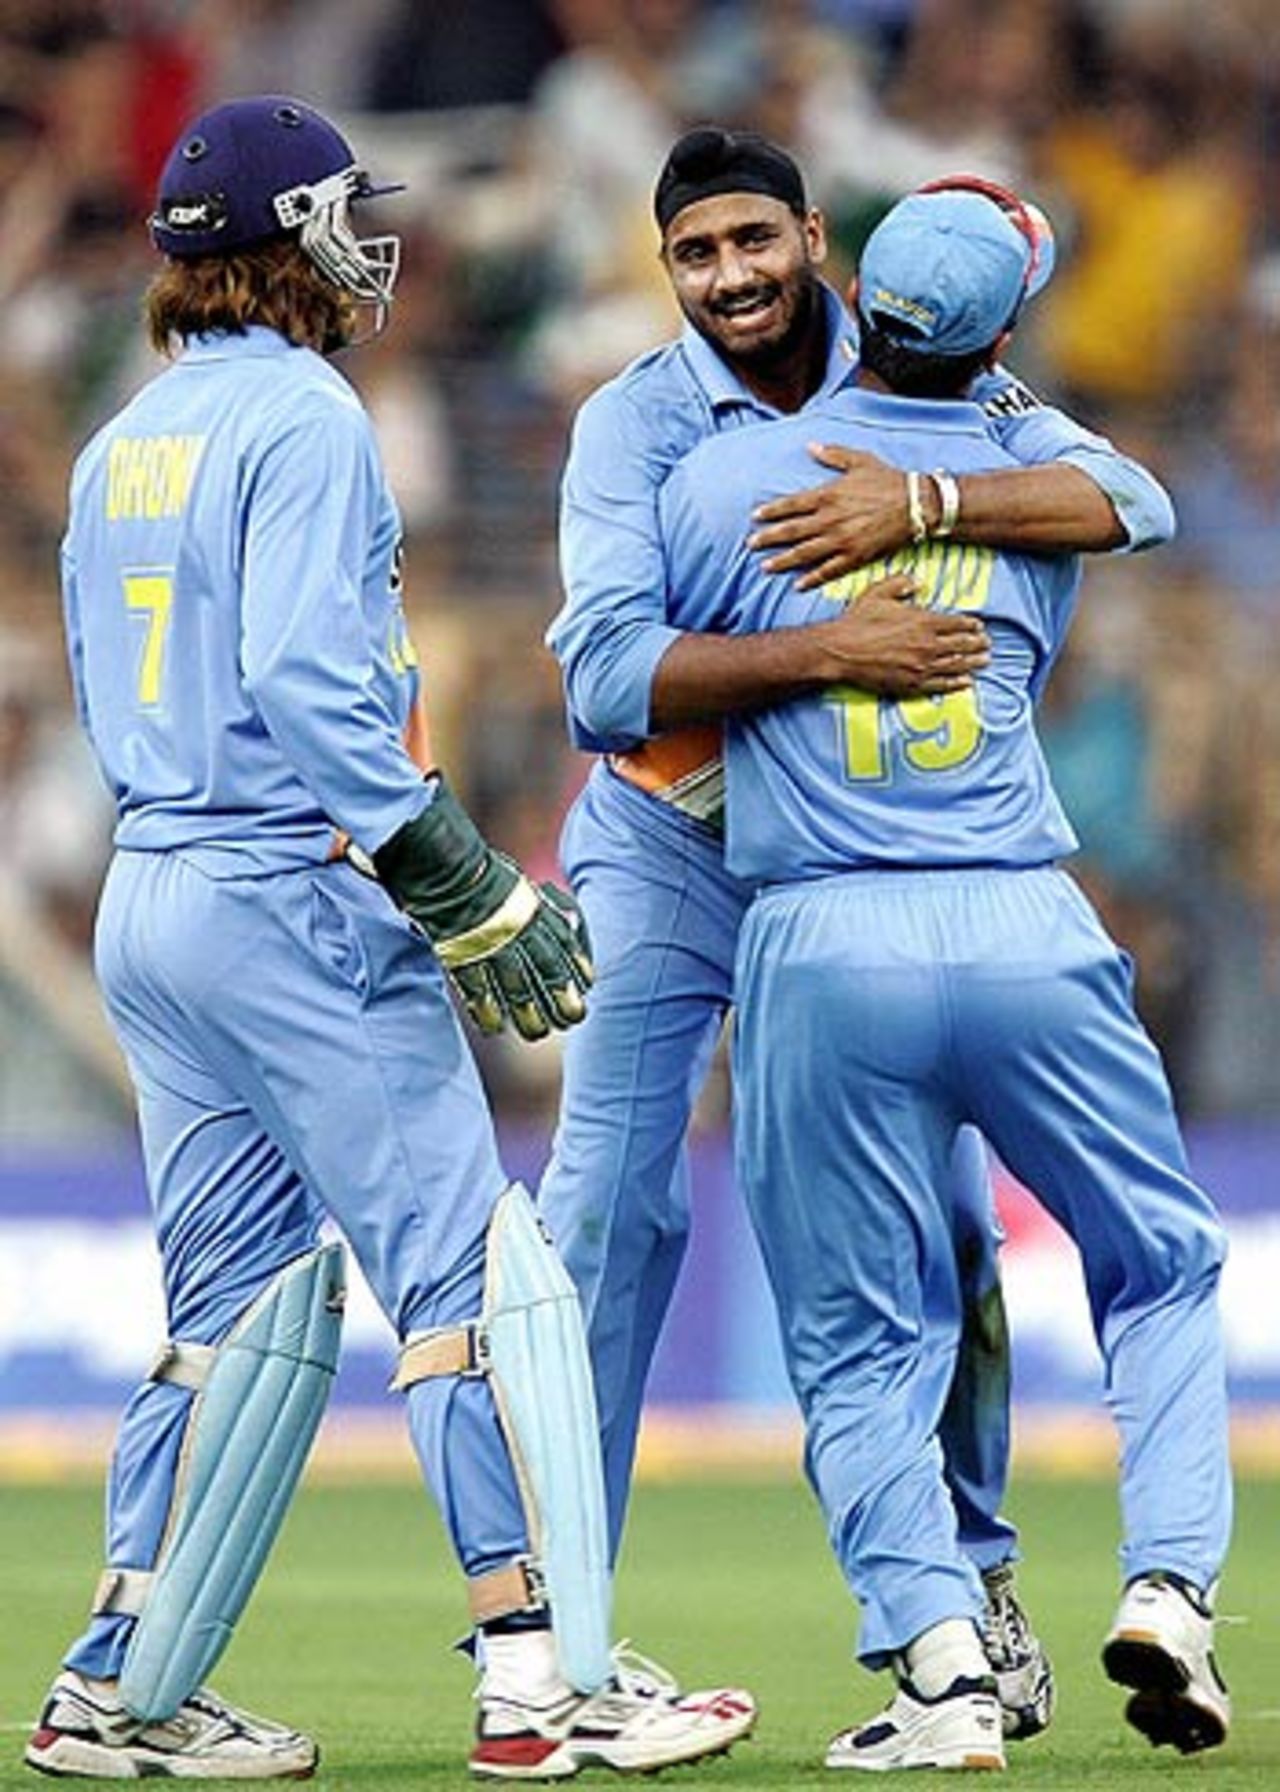 Harbhajan Singh is congratulated by team-mates after another key wicket, India v South Africa, 5th ODI, Mumbai, November 25, 2005